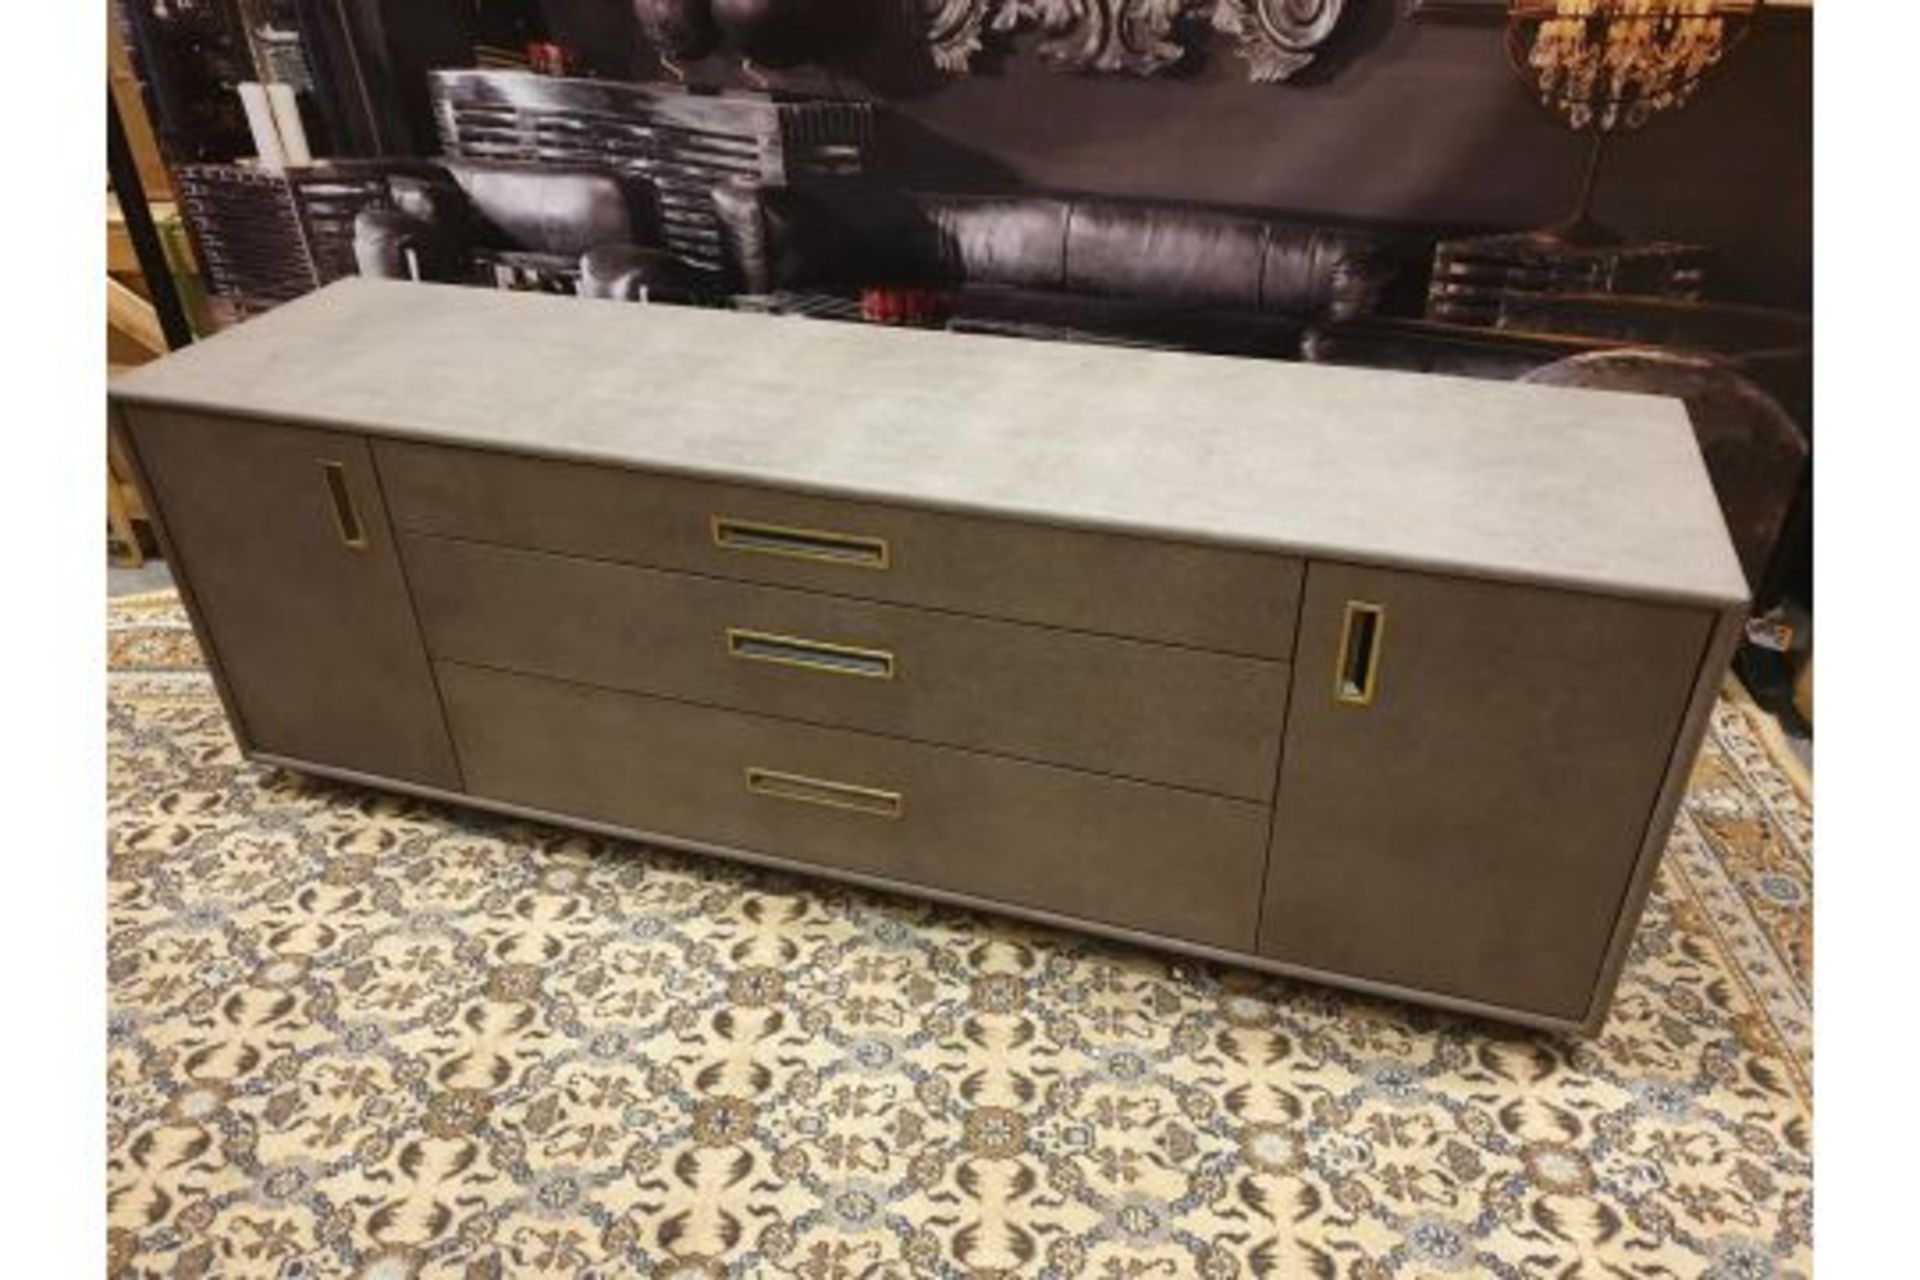 Starbay Shagreen 2 Door 3 Drawer Cabinet Stunning And Functional With Boundless Character And